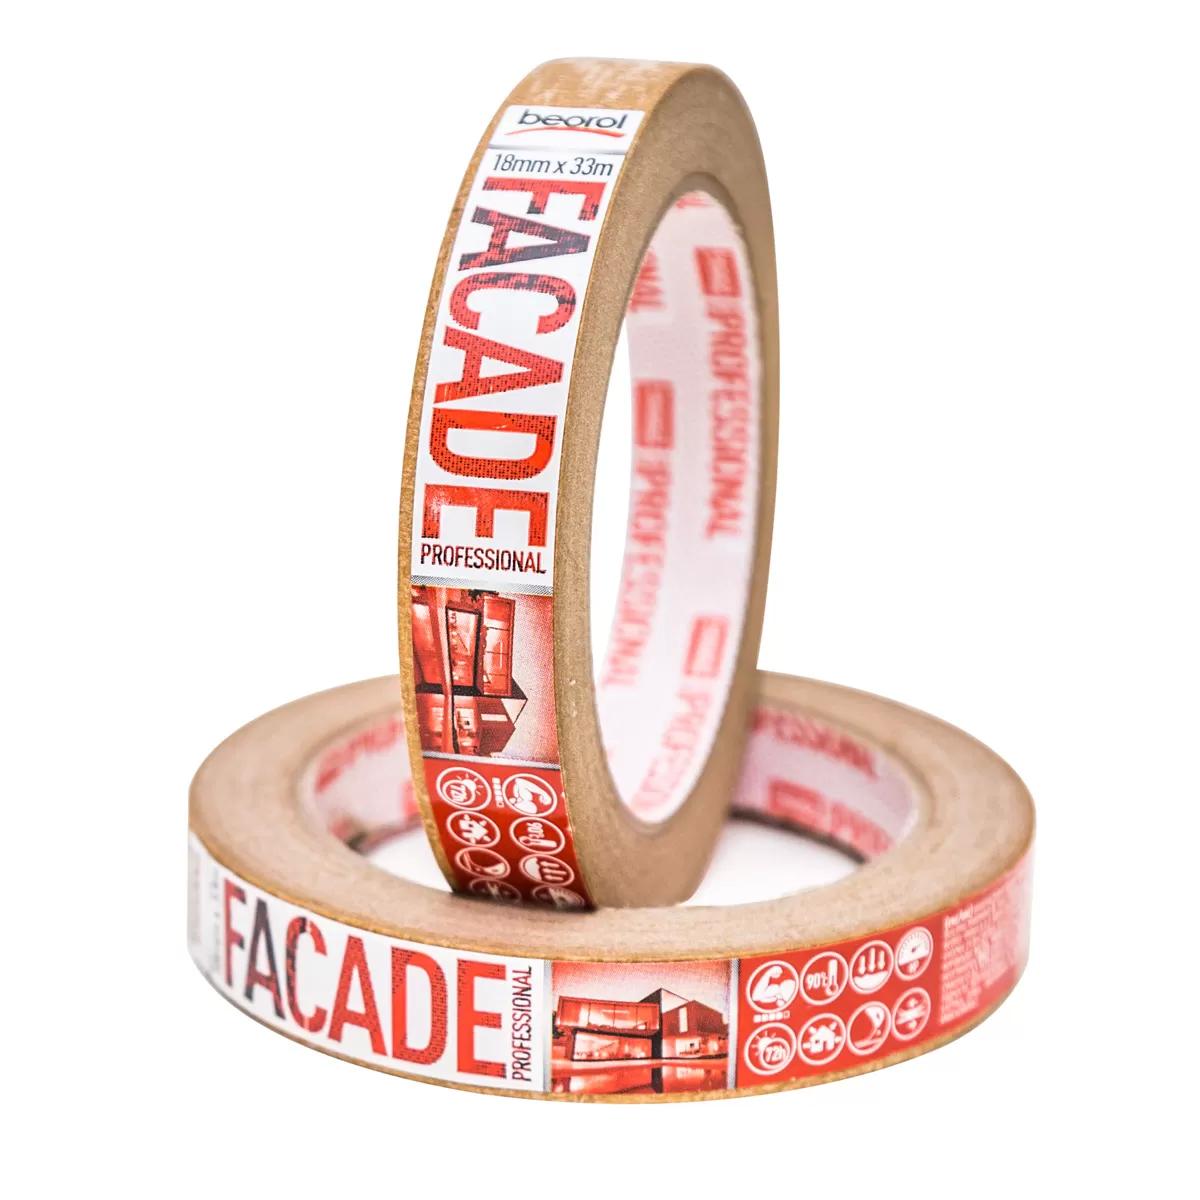 Masking tape Facade Professional 18mm x 33m, 90ᵒC 